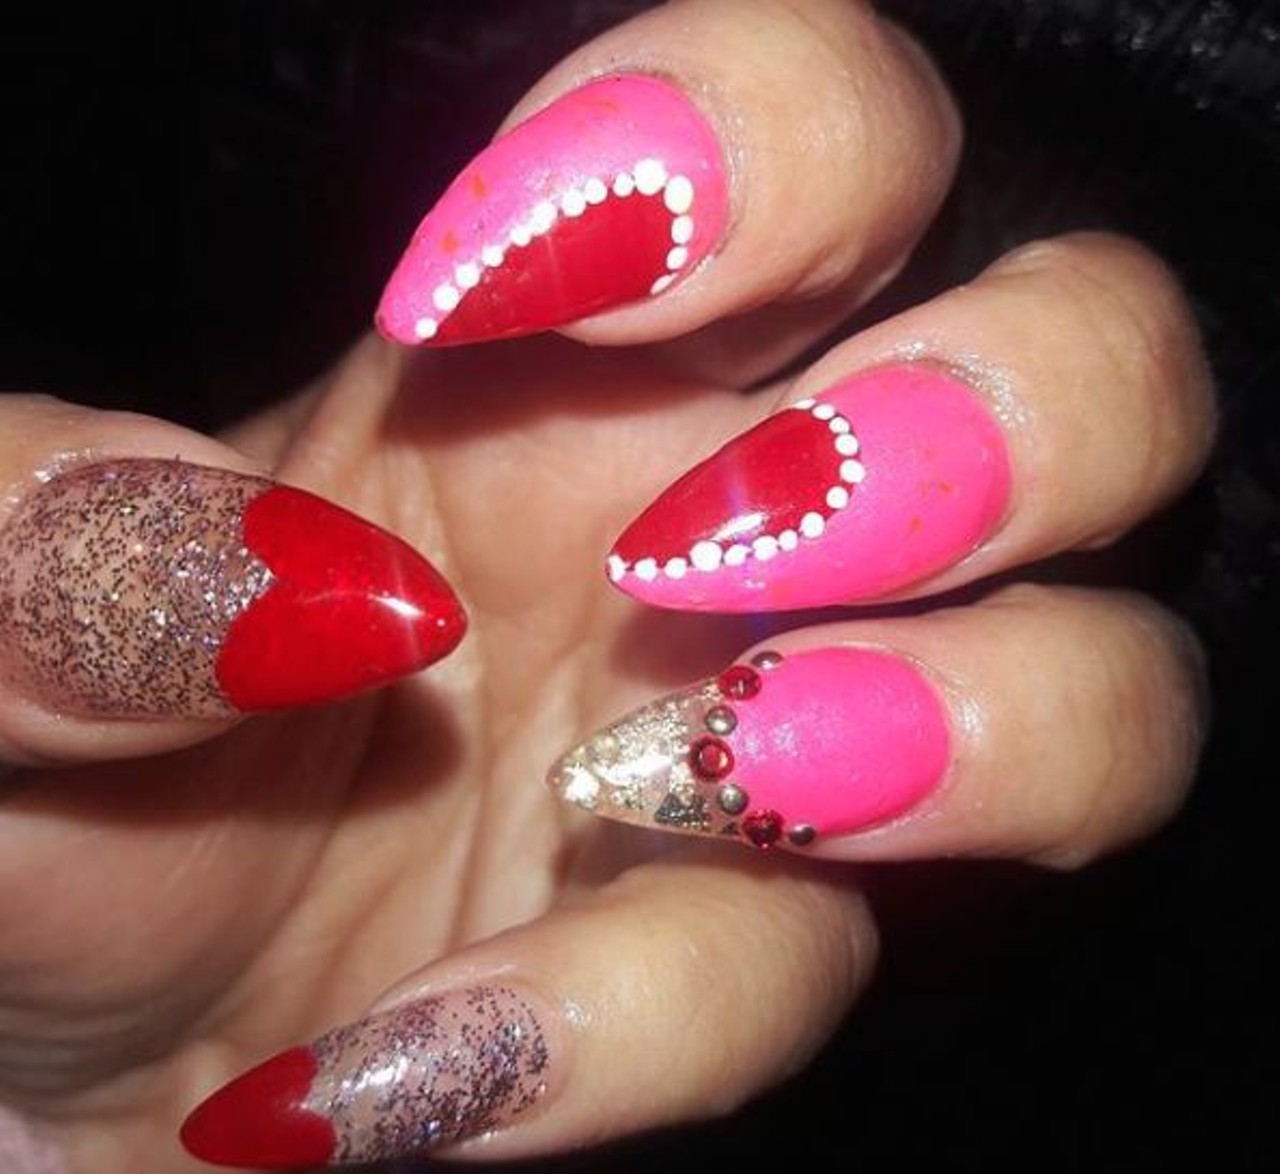  nailsbyniqua
Niqua is a nail technician who likes to venture into as many realms of nail art as possible. Message her for more information about appointments. Her Instagram bio states that if you name something, she probably does it.
Photo via nailsbyniqua/Instagram